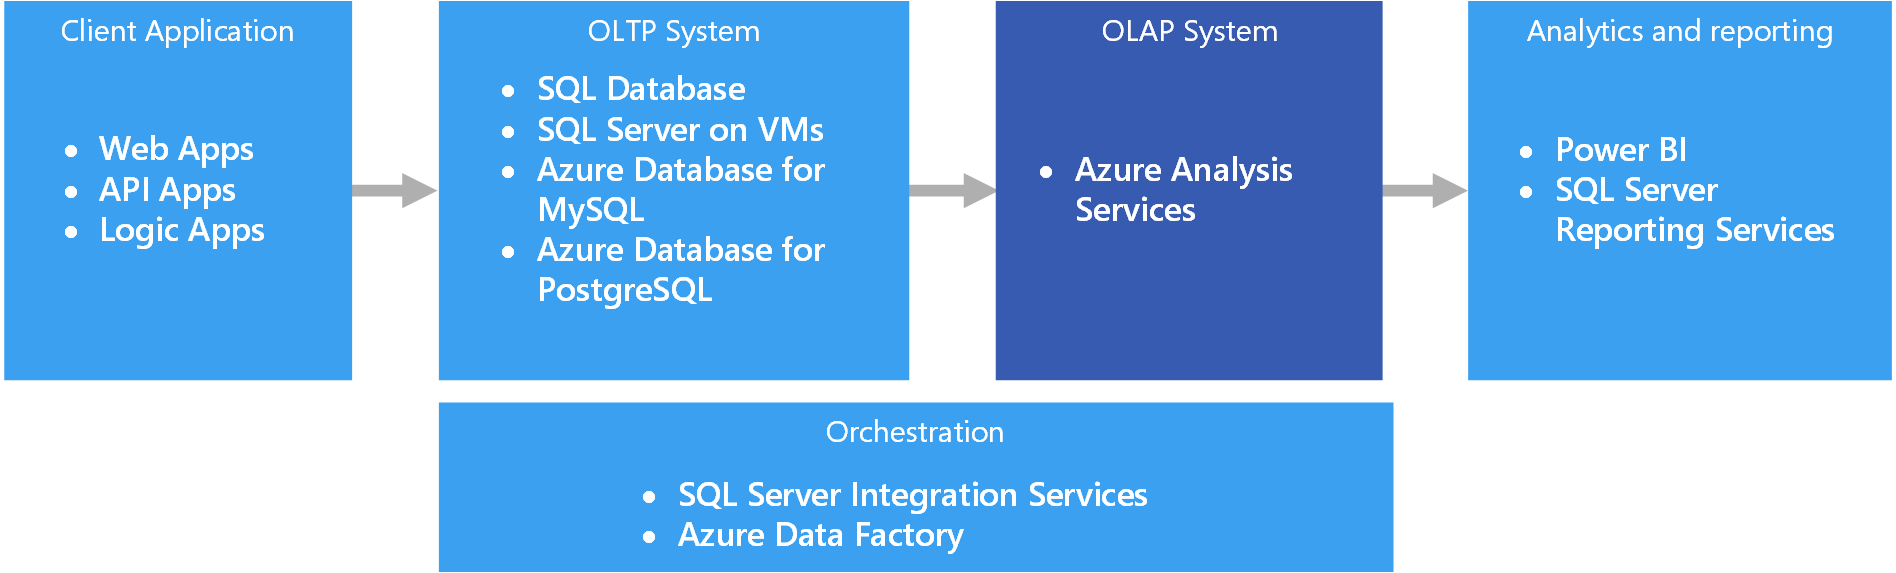 Online analytical processing (OLAP) - Azure Architecture Center | Microsoft  Learn